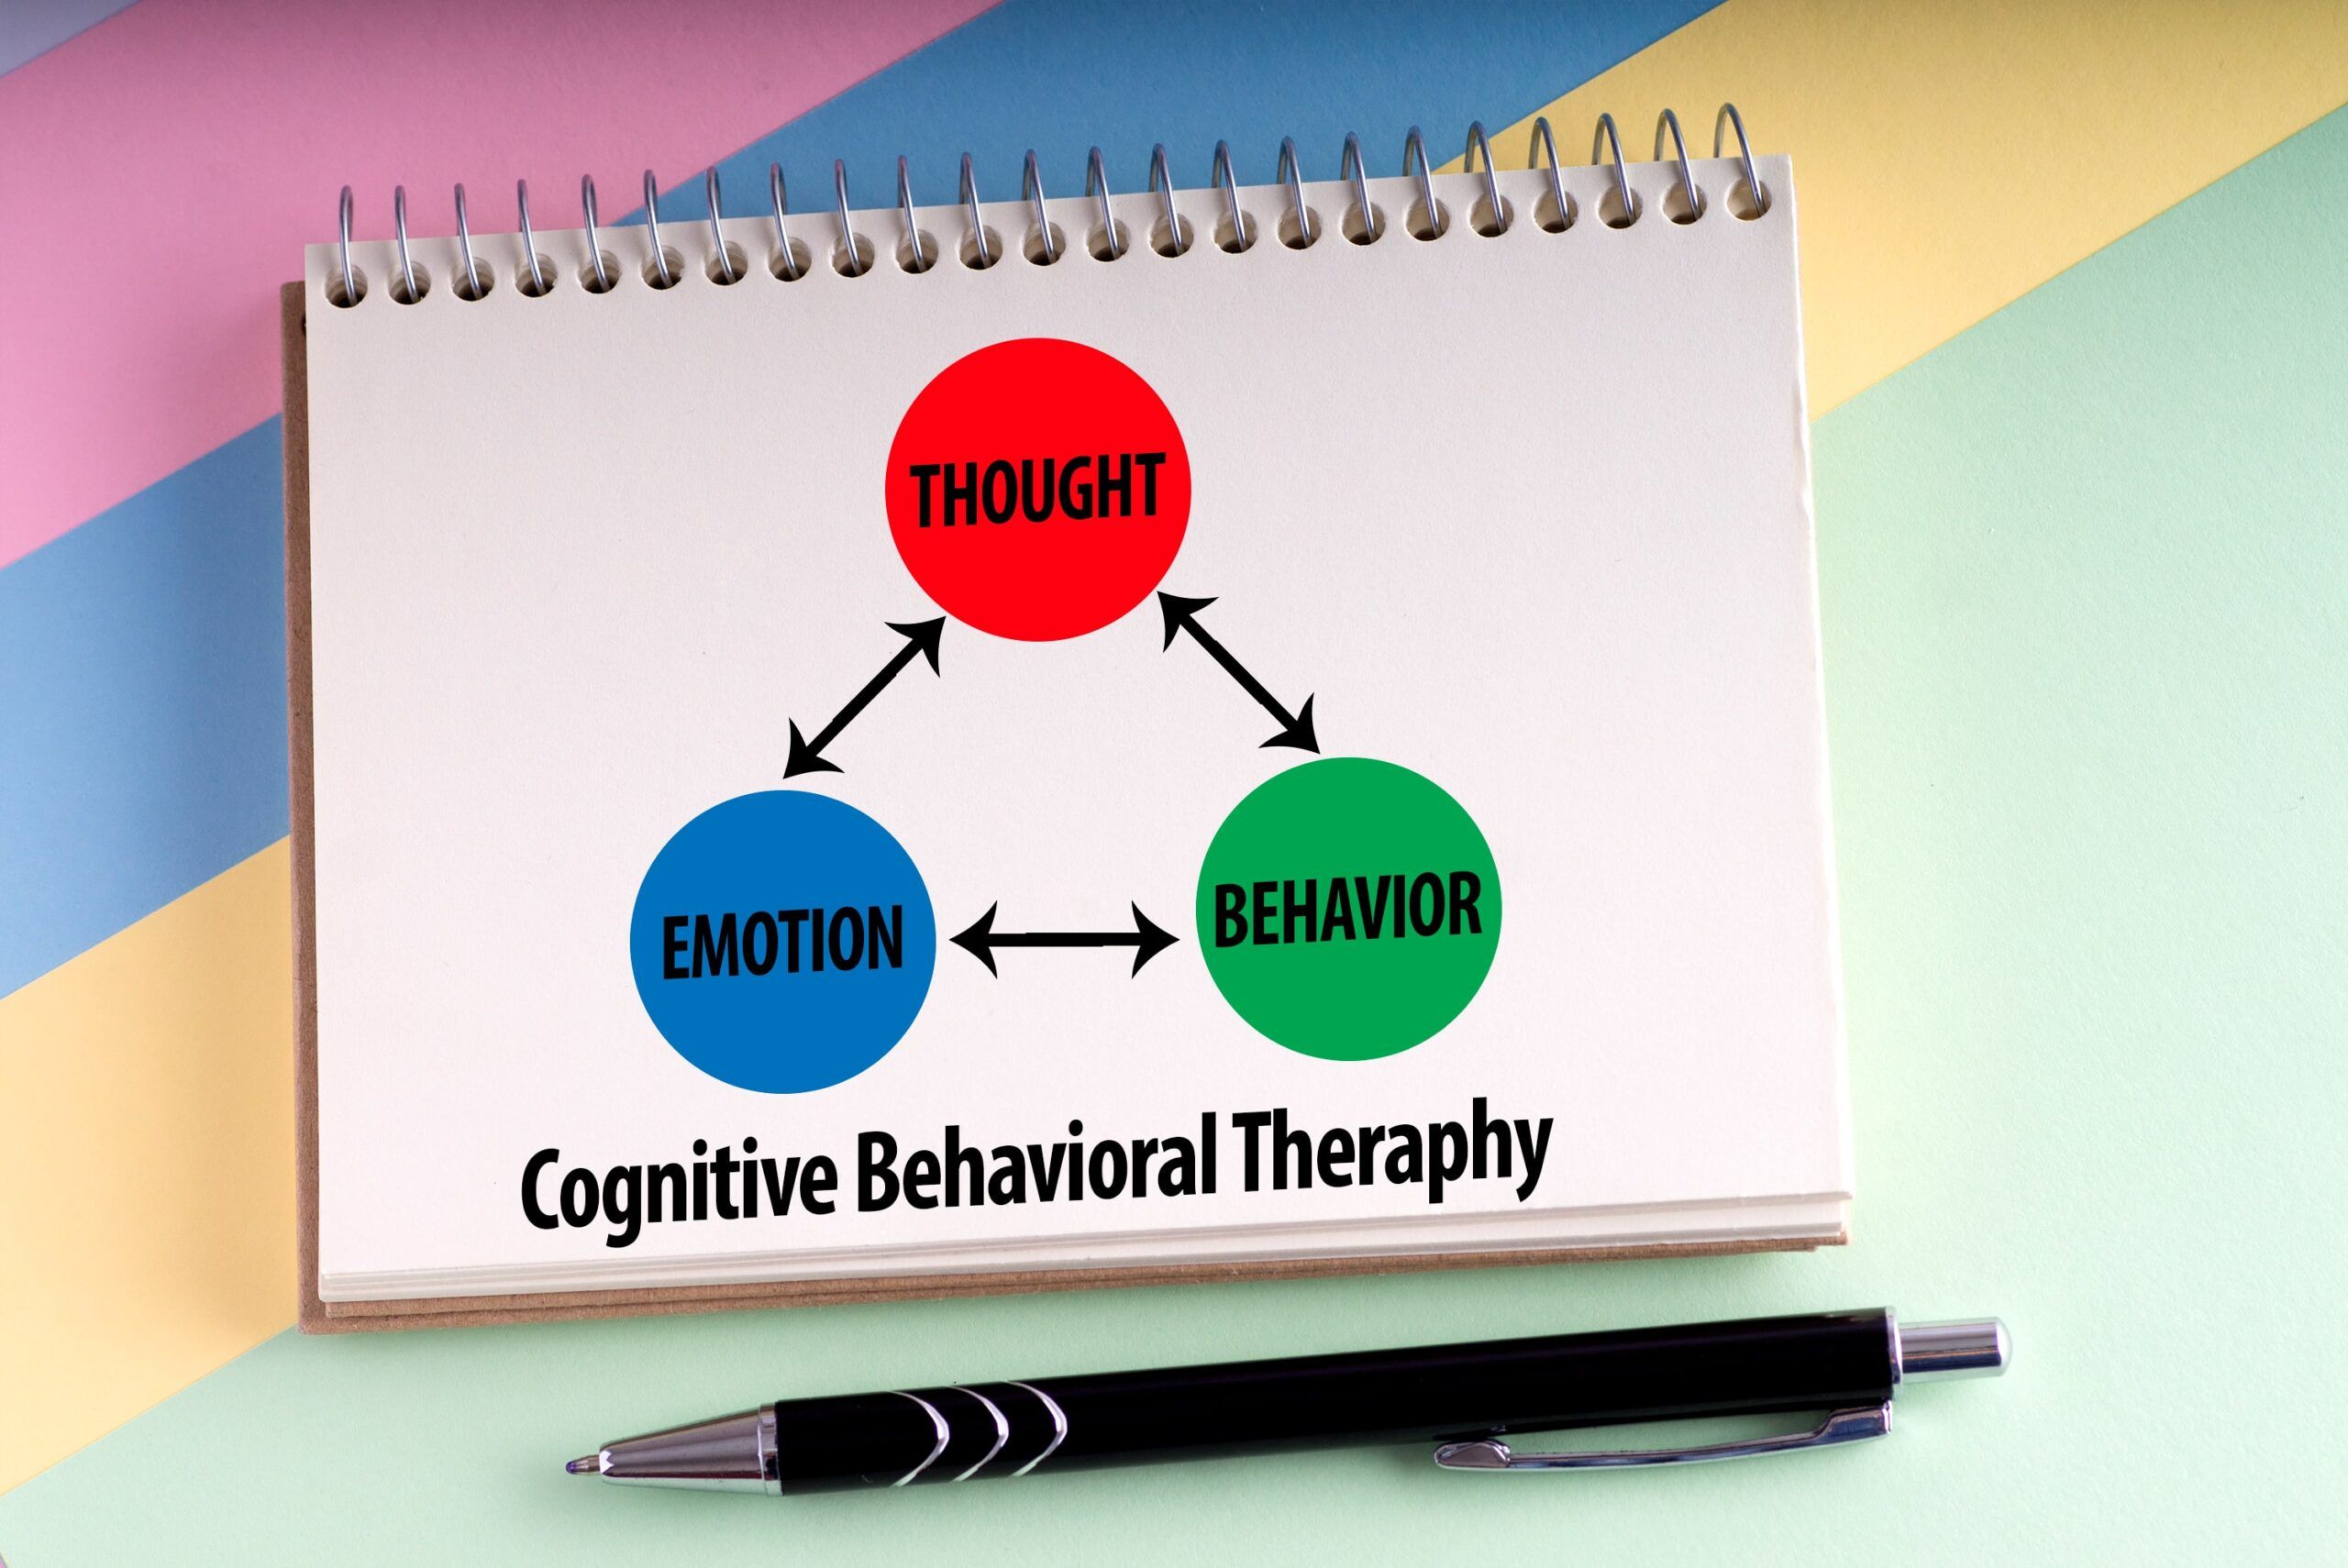 cognitive behavioral therapy diagram shows relationship among thoughts, emotions, and behaviors